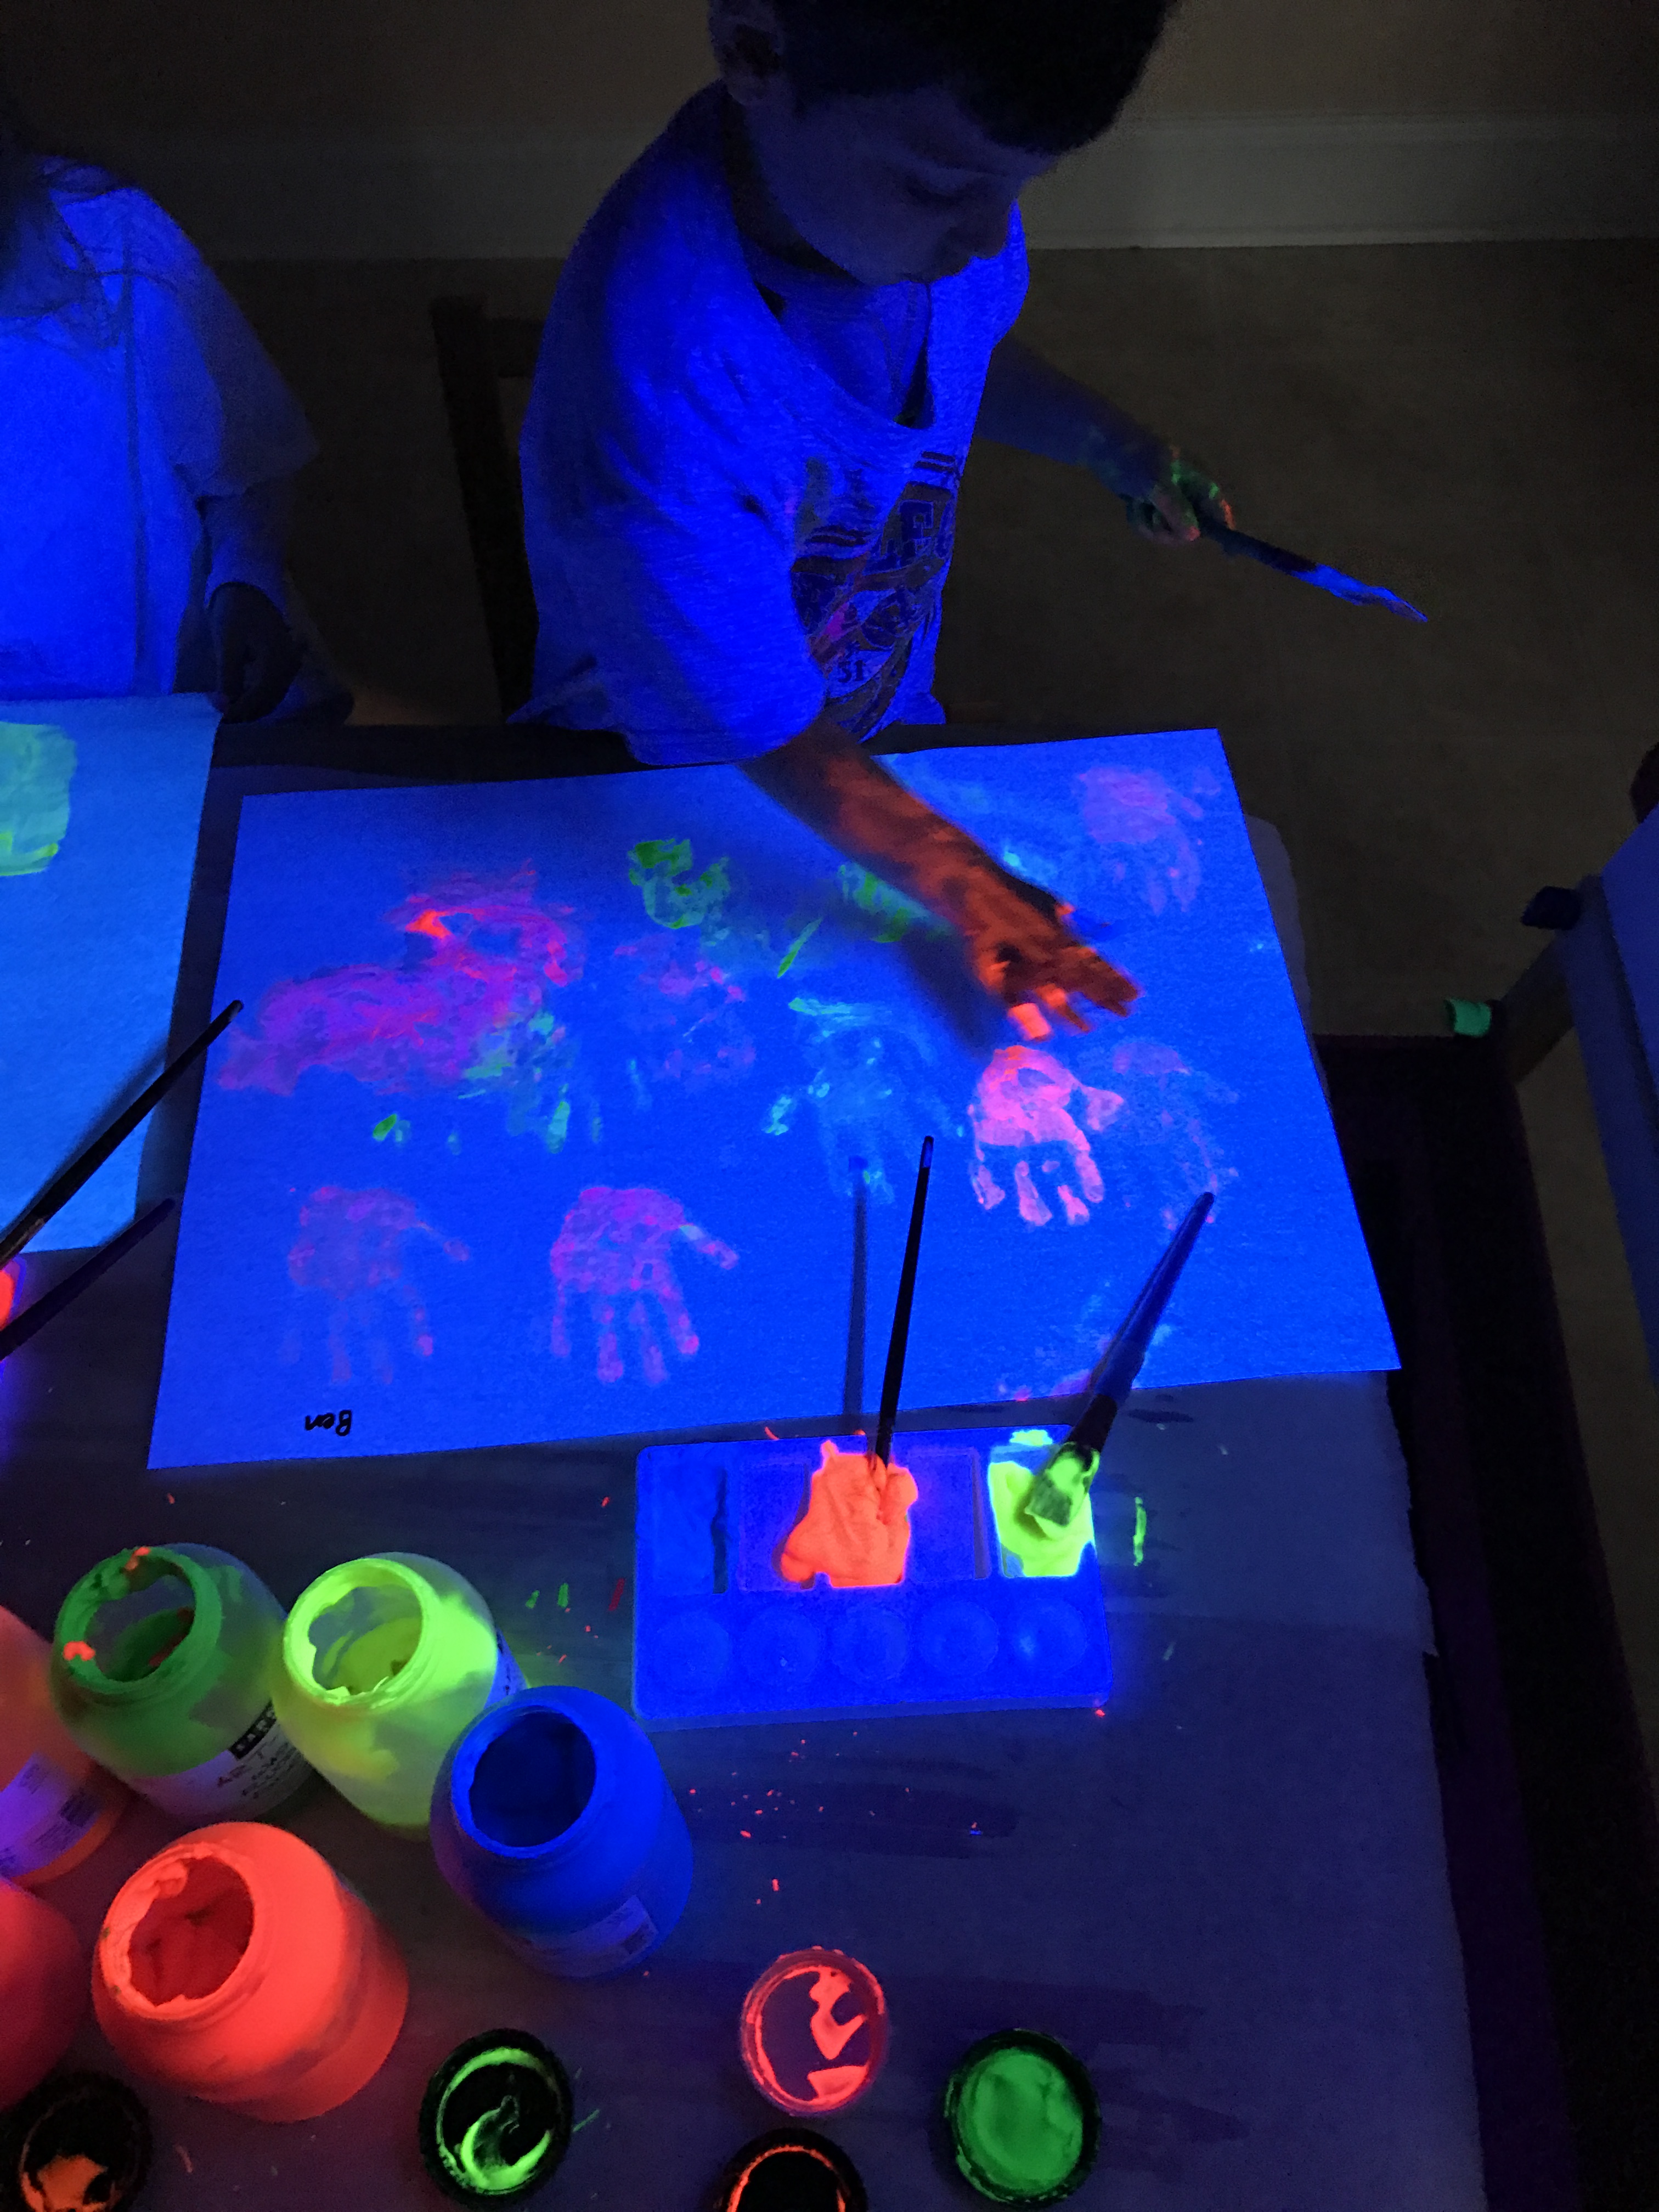 Exercises for Young Children on the Glow Art Kids Drawing Board